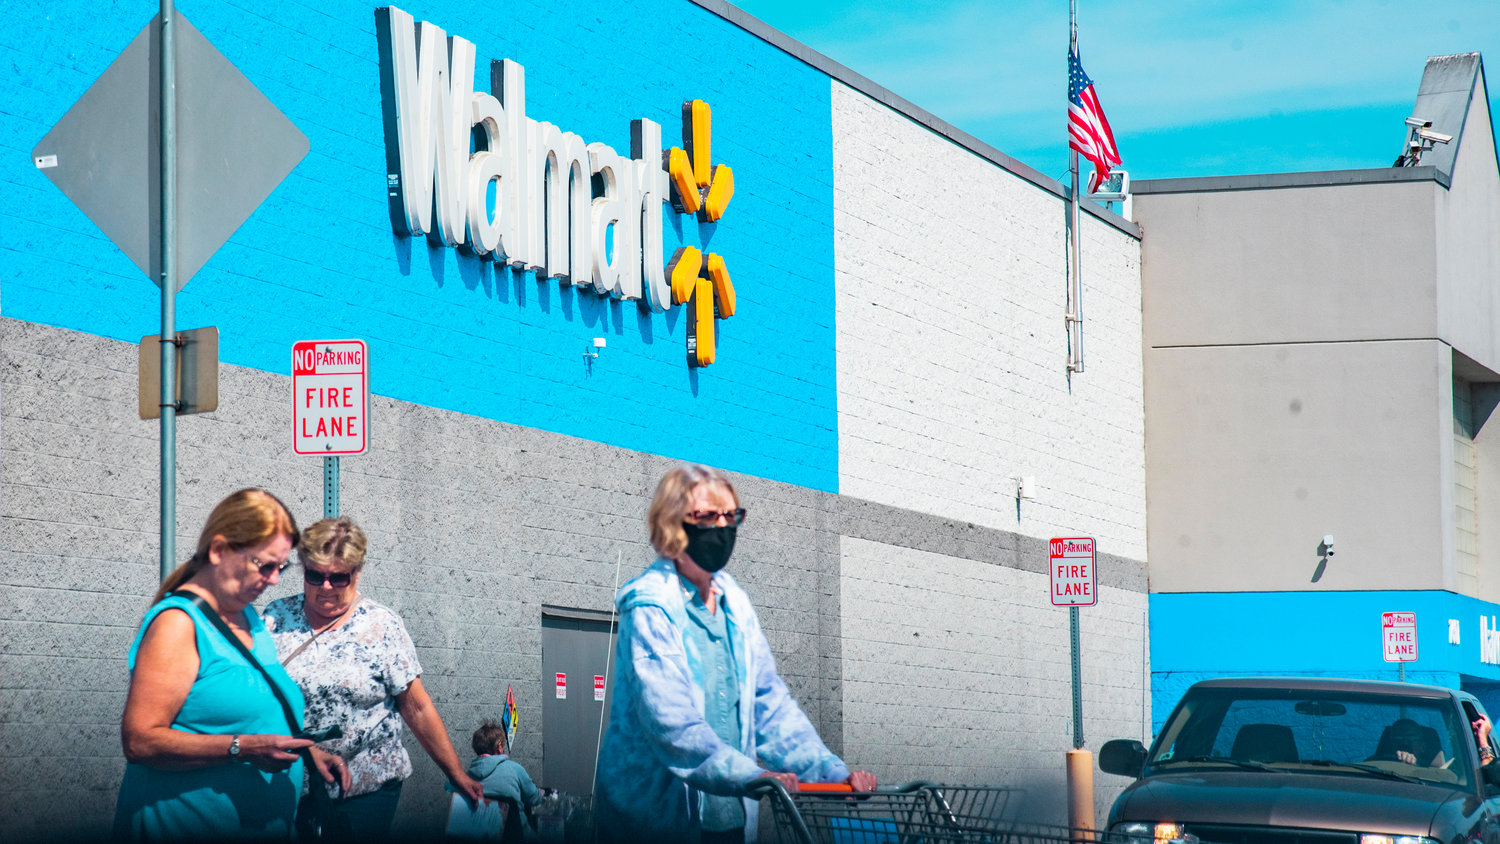 Walmart, located at 1601 NW Louisiana Avenue in Chehalis, is seen on a sunny Tuesday afternoon.